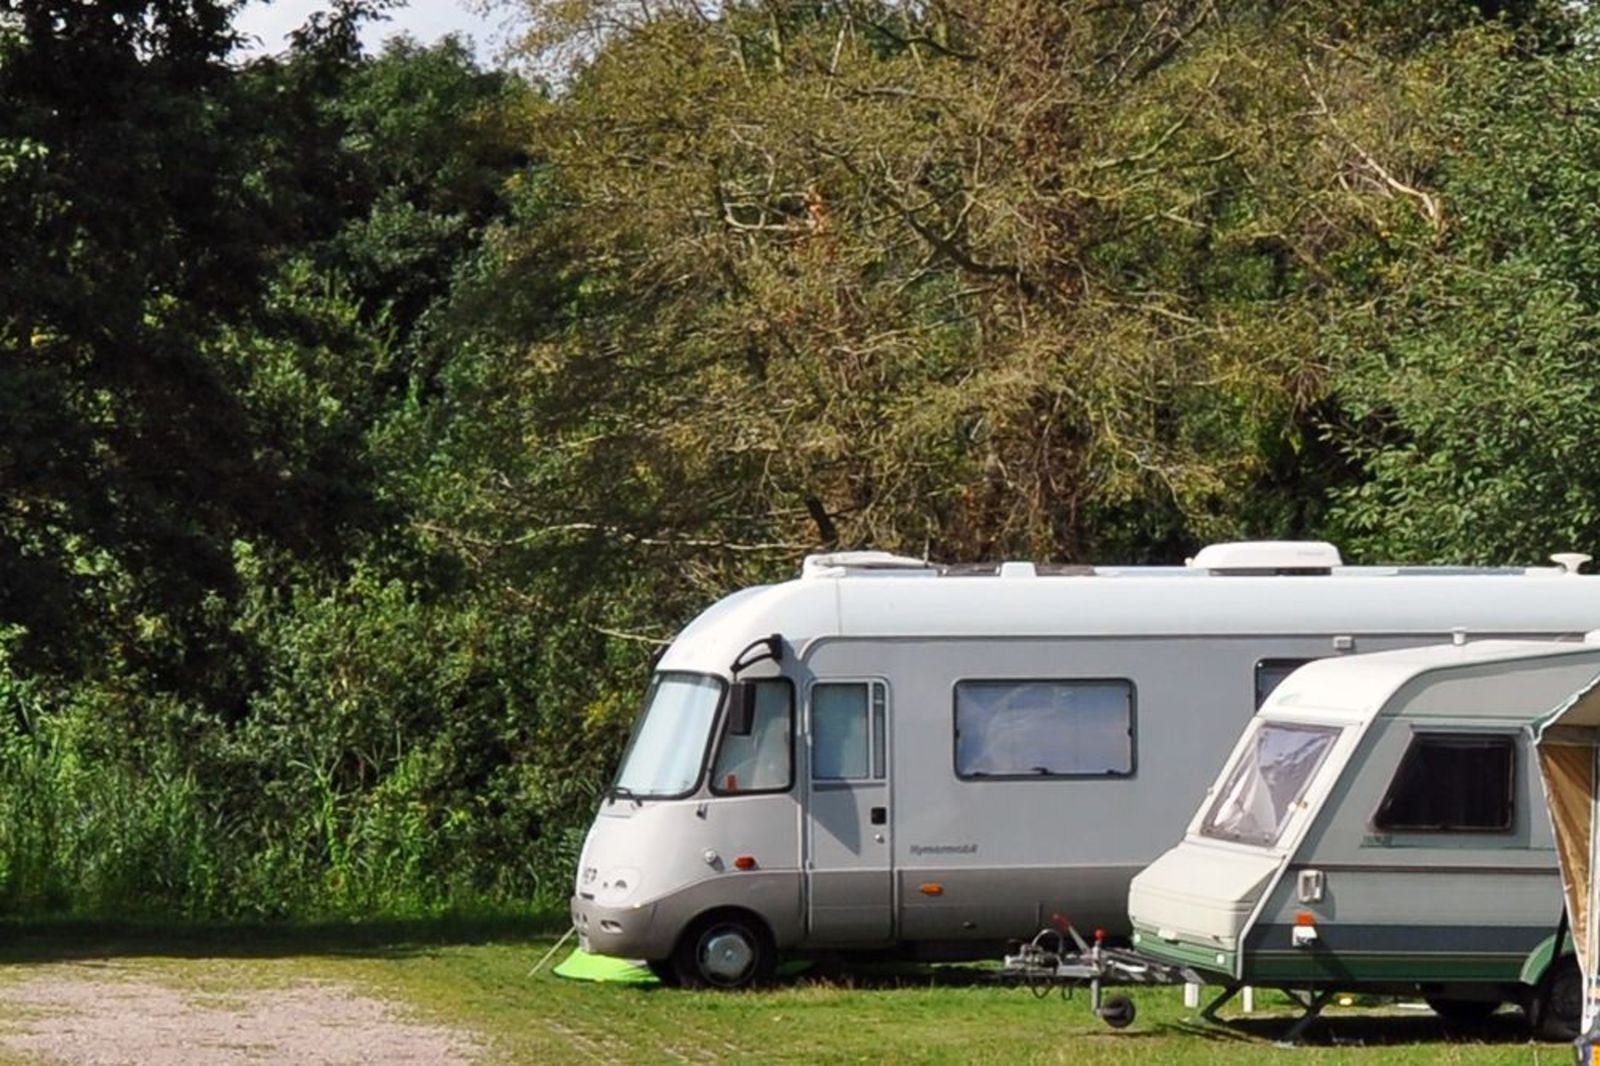 Two motorhome/camper pitches side by side on a corner